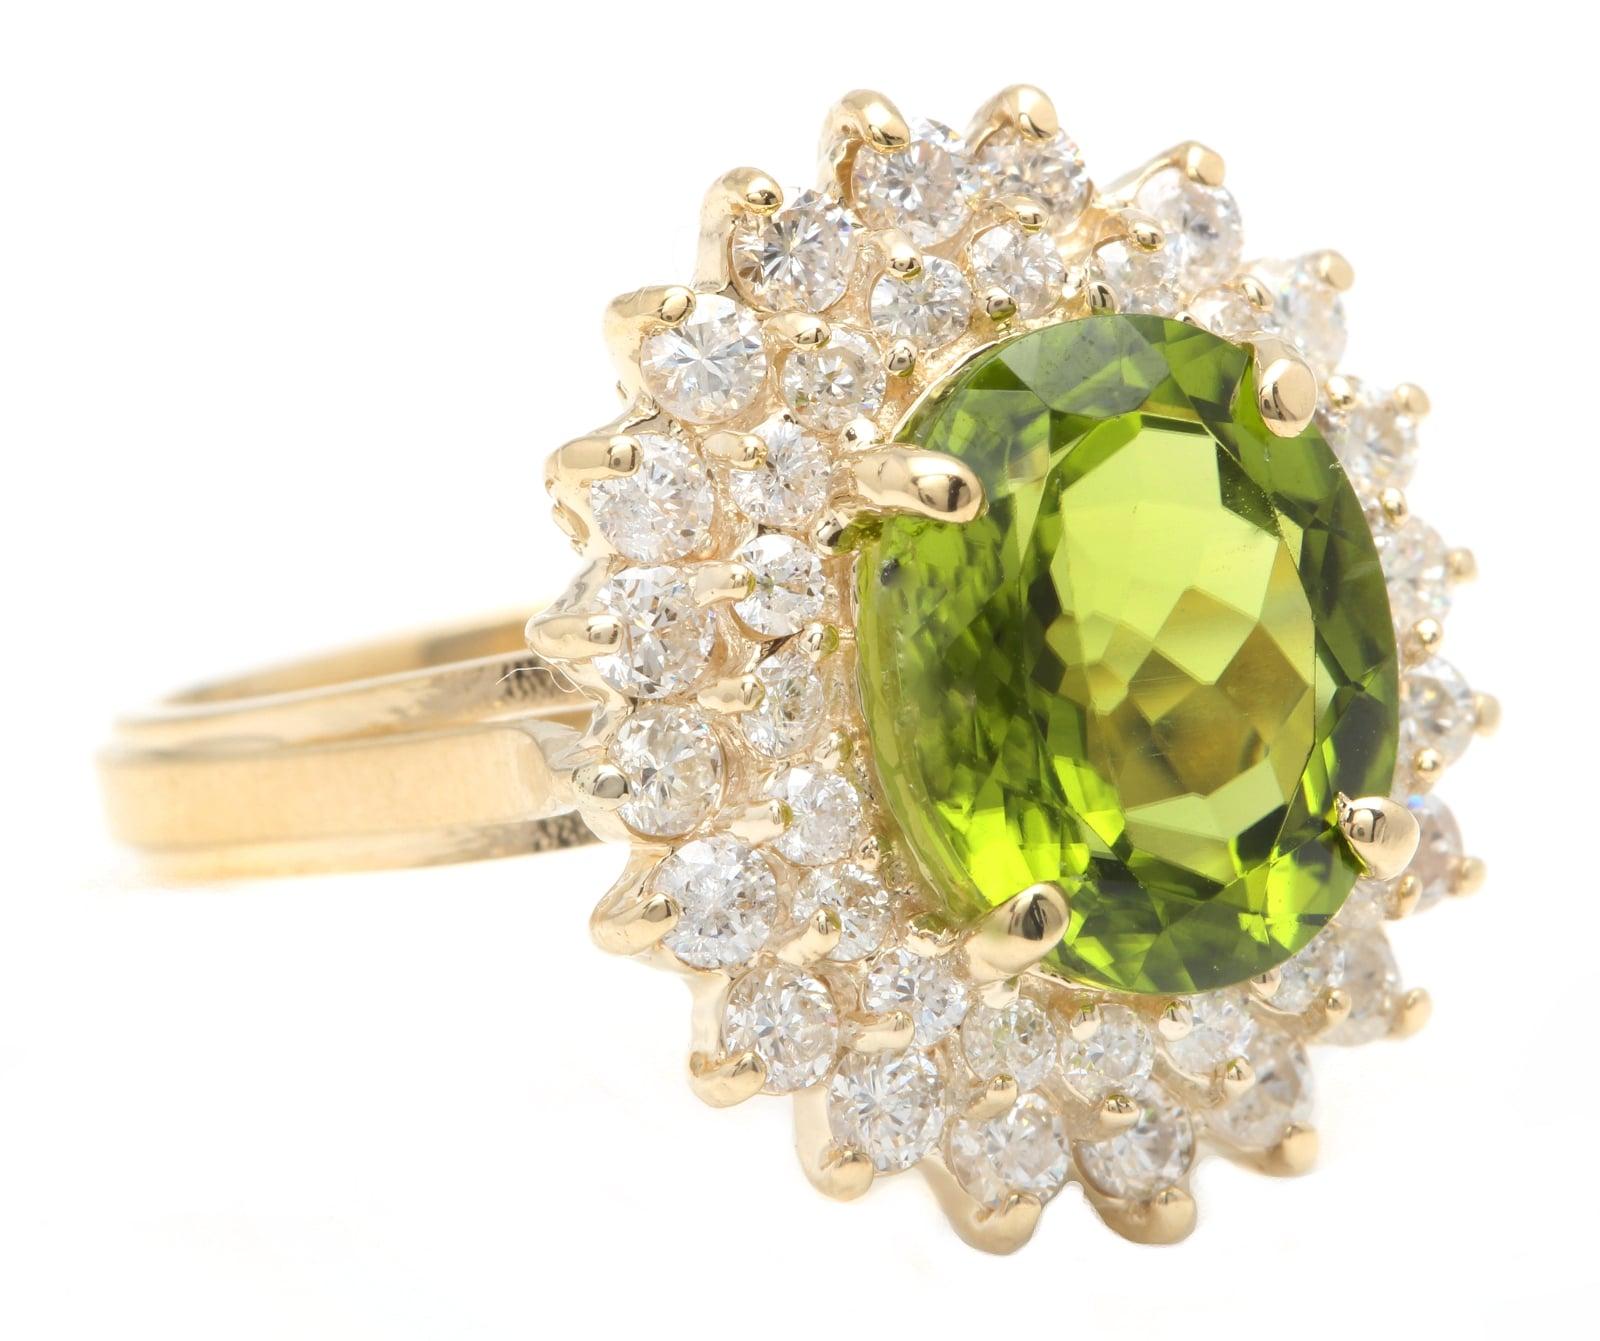 5.30 Carats Impressive Natural Peridot and Diamond 14K Yellow Gold Ring

Suggested Replacement Value: Approx. $5,500.00

Total Natural Peridot Weight is: Approx. 4.00 Carats

Peridot Measures: Approx. 11.00 x 9.00mm

Natural Round Diamonds Weight: